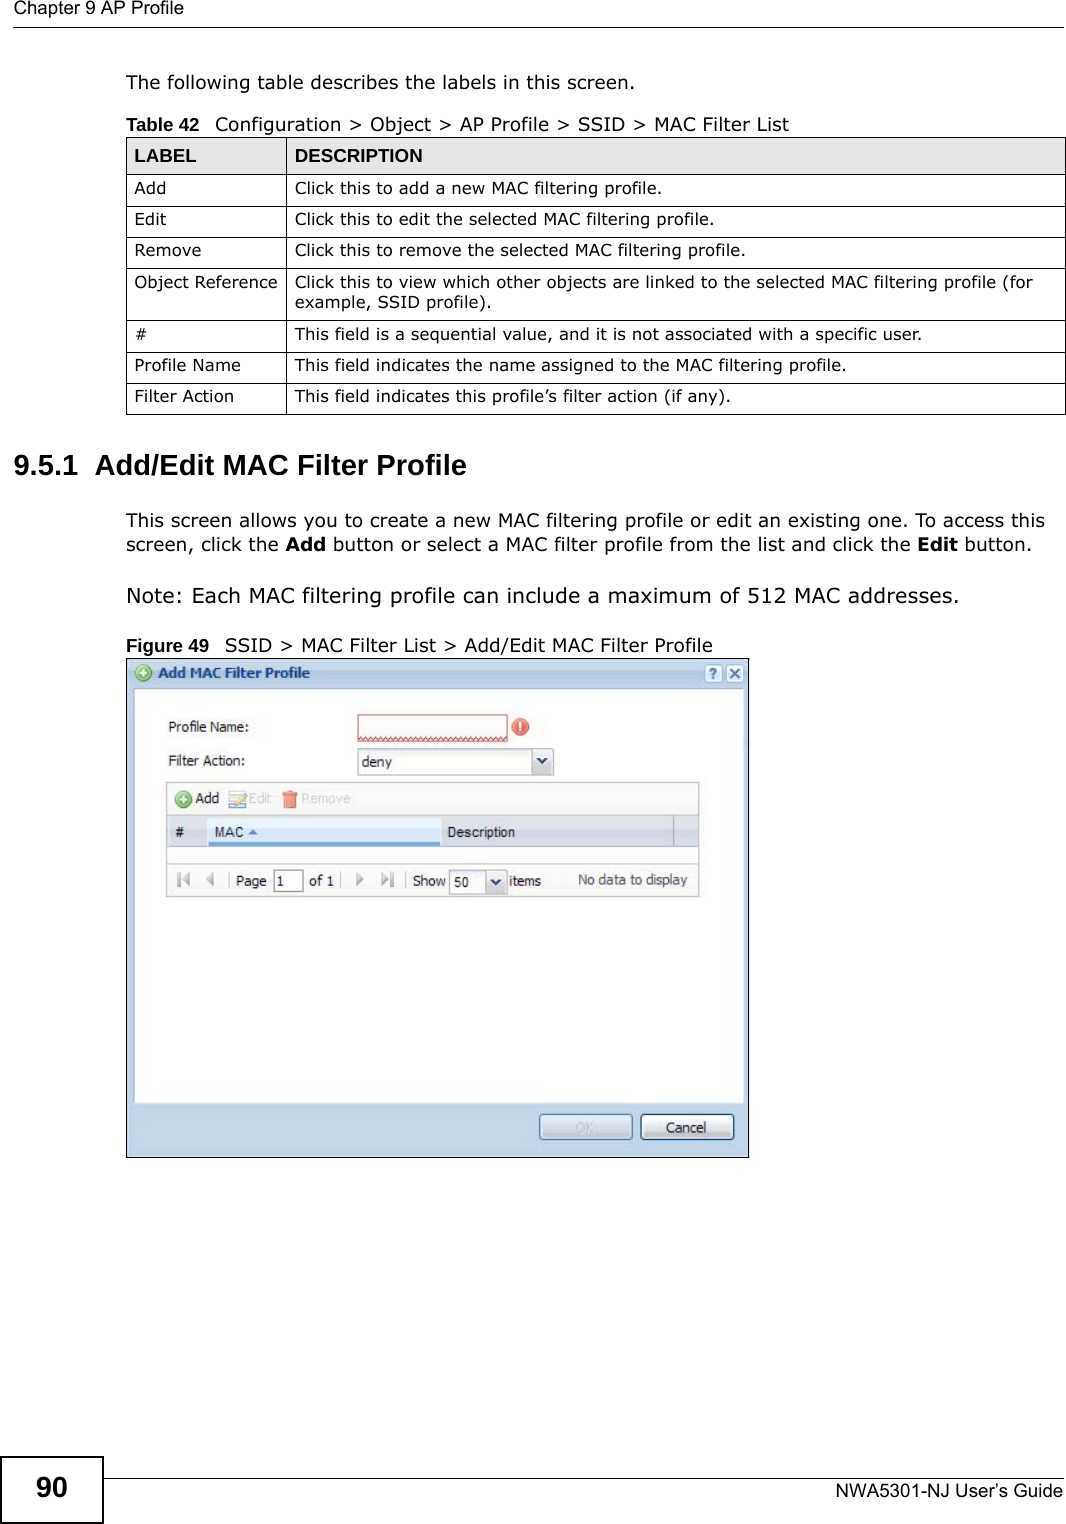 Chapter 9 AP ProfileNWA5301-NJ User’s Guide90The following table describes the labels in this screen.  9.5.1  Add/Edit MAC Filter ProfileThis screen allows you to create a new MAC filtering profile or edit an existing one. To access this screen, click the Add button or select a MAC filter profile from the list and click the Edit button.Note: Each MAC filtering profile can include a maximum of 512 MAC addresses.Figure 49   SSID &gt; MAC Filter List &gt; Add/Edit MAC Filter ProfileTable 42   Configuration &gt; Object &gt; AP Profile &gt; SSID &gt; MAC Filter ListLABEL DESCRIPTIONAdd Click this to add a new MAC filtering profile.Edit Click this to edit the selected MAC filtering profile.Remove Click this to remove the selected MAC filtering profile.Object Reference Click this to view which other objects are linked to the selected MAC filtering profile (for example, SSID profile).# This field is a sequential value, and it is not associated with a specific user.Profile Name This field indicates the name assigned to the MAC filtering profile.Filter Action This field indicates this profile’s filter action (if any).